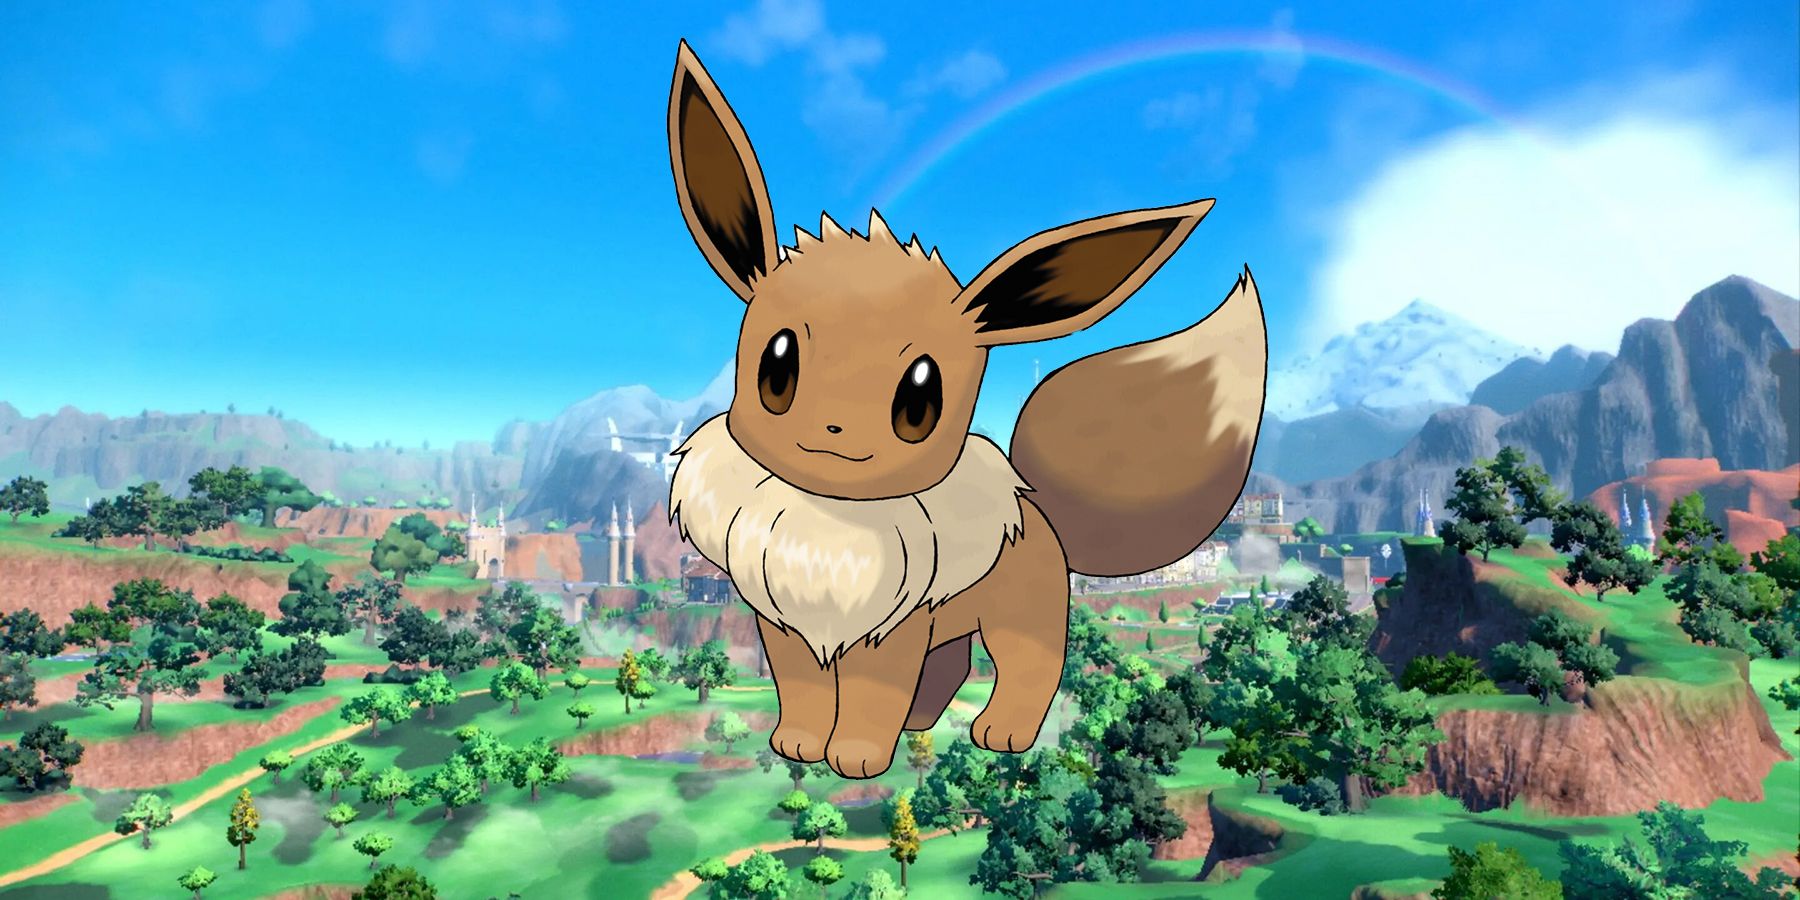 Official artwork of venomeon, a poison-type eeveelution